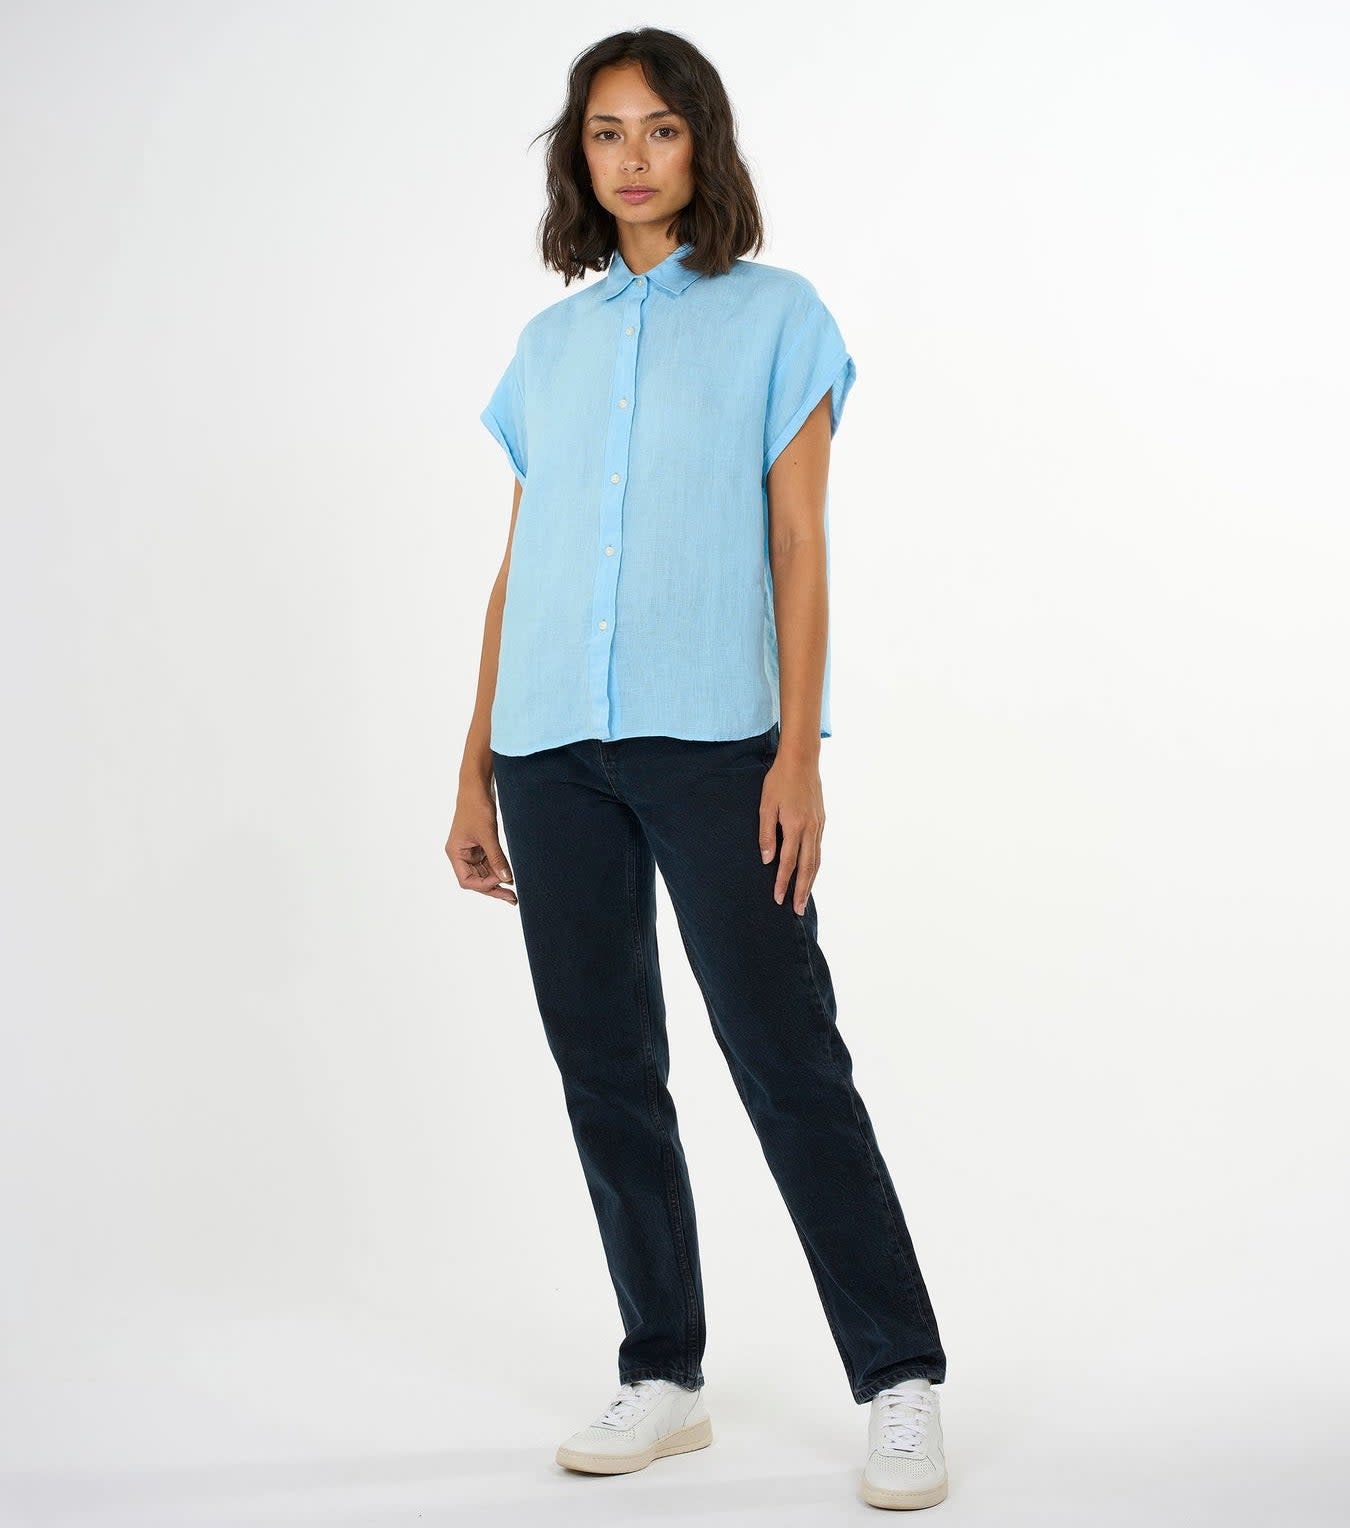 KnowledgeCotton Apparel KnowledgeCotton, Aster Shirt, airy blue, M